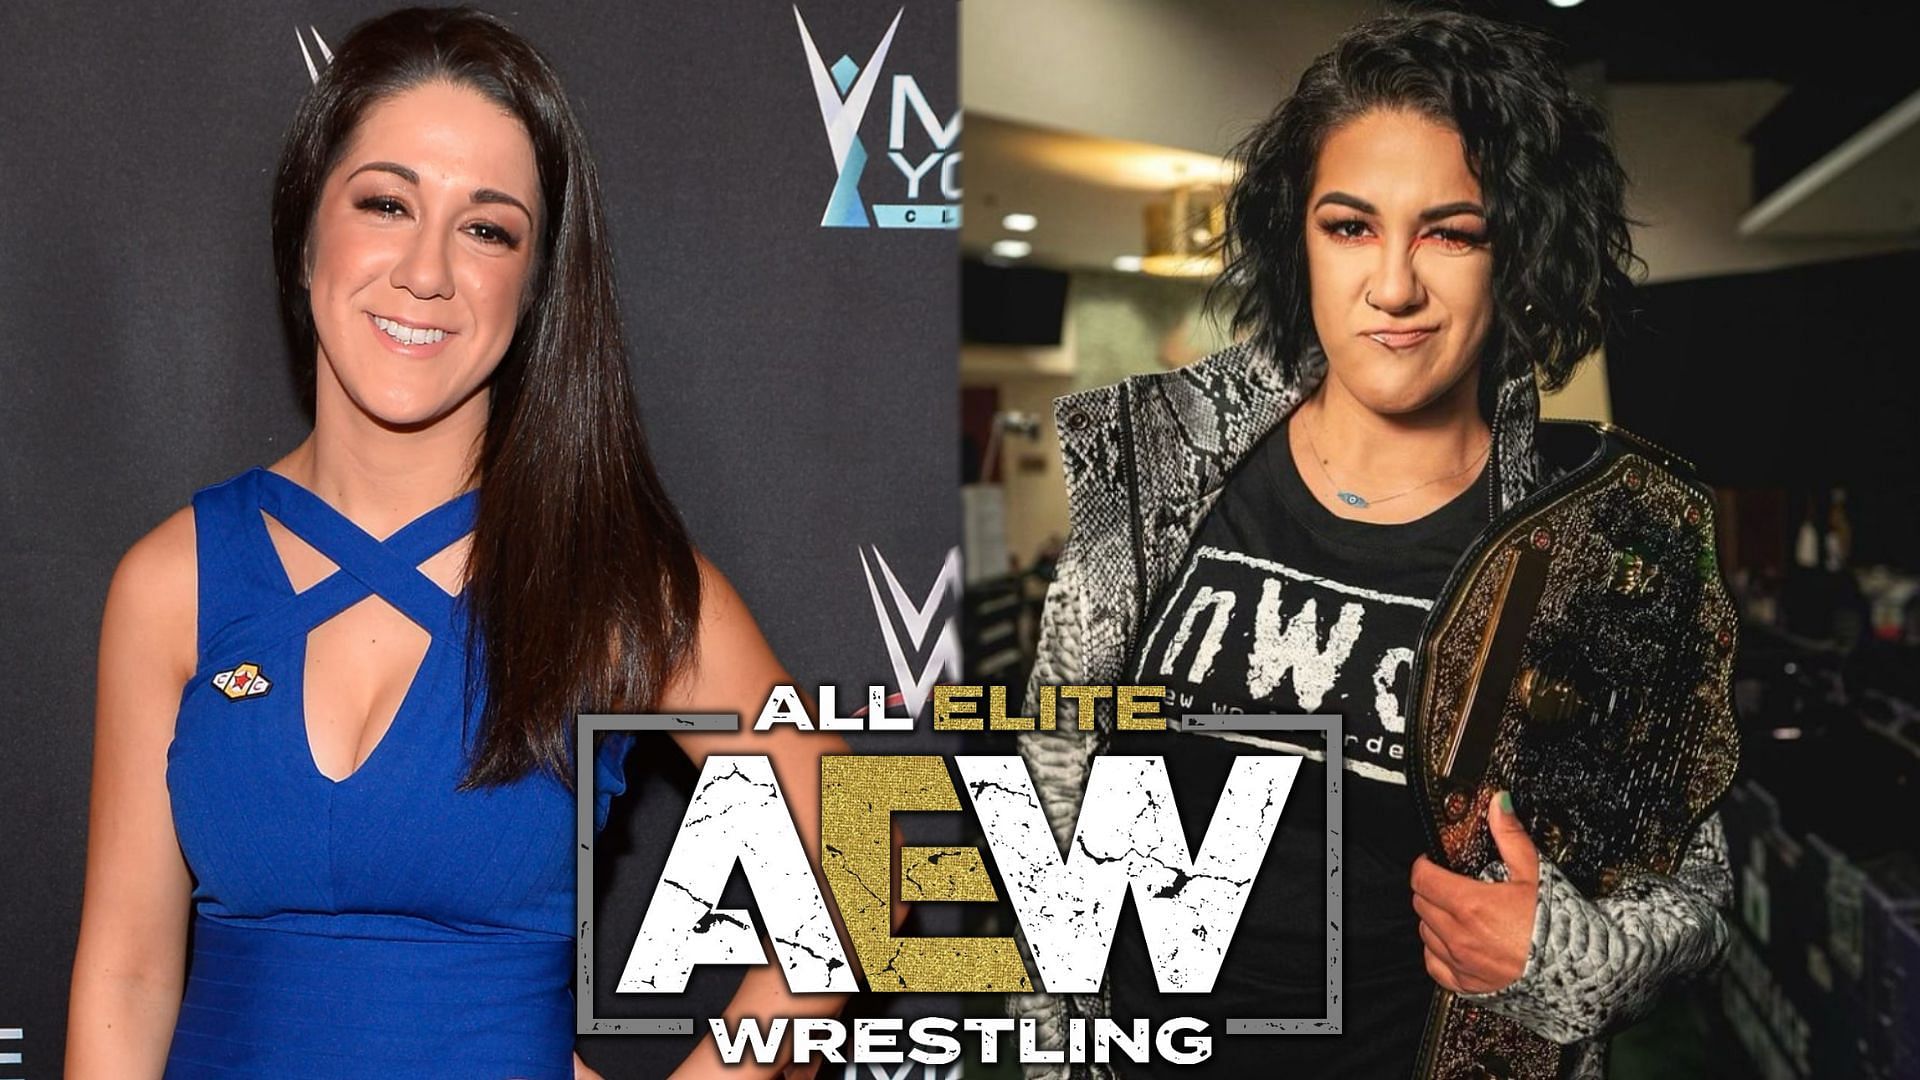 Bayley has been romantically tied to a number of wrestlers, but only one has been confirmed.